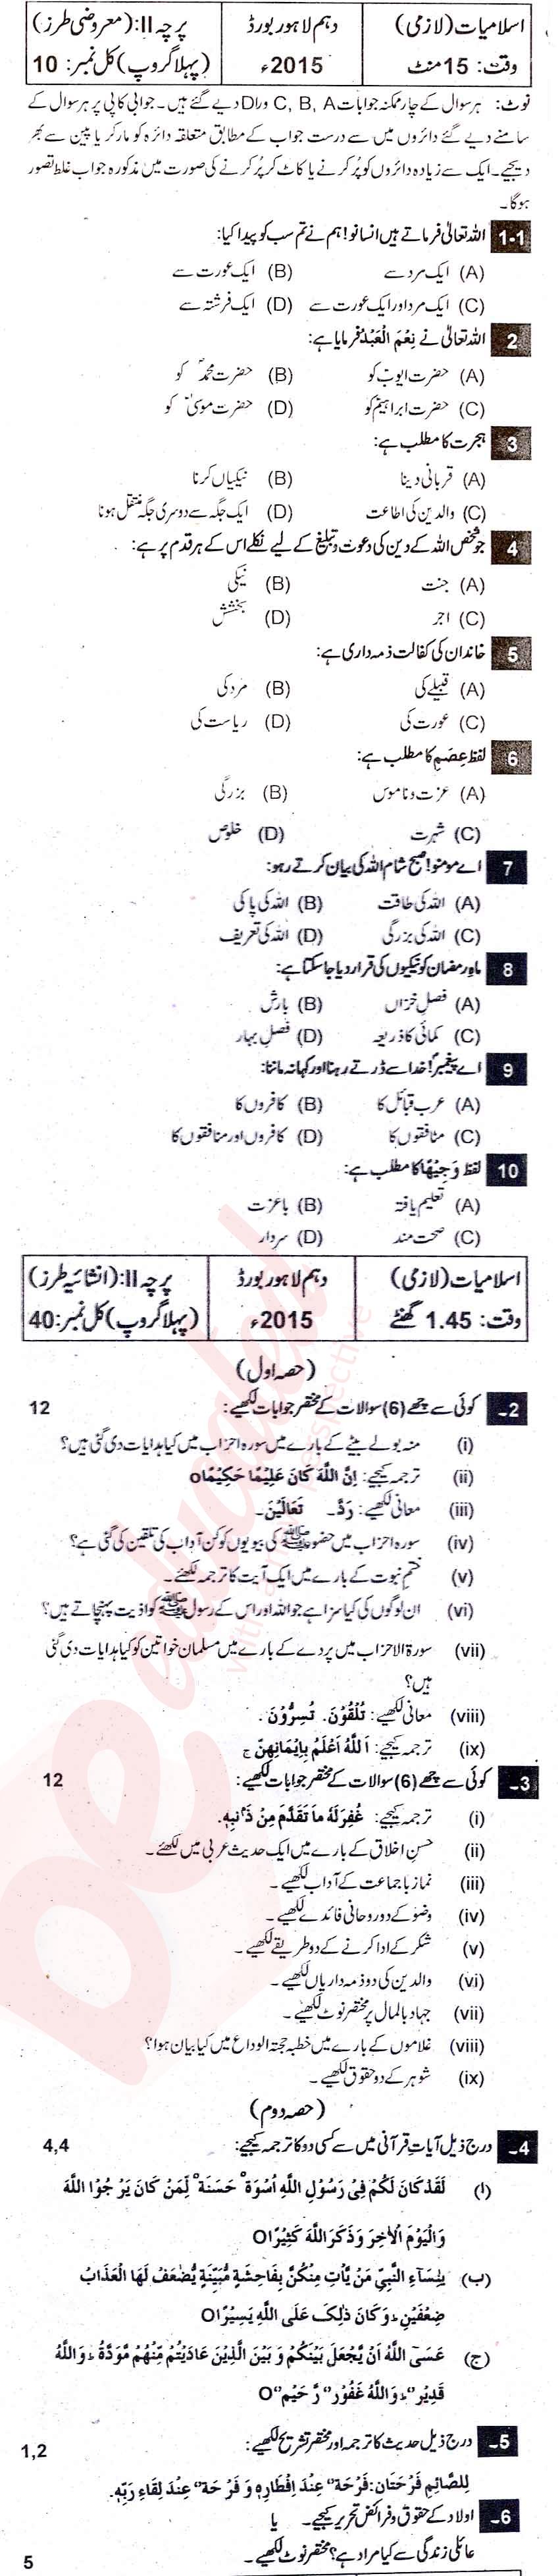 Islamiat (Compulsory) 10th class Past Paper Group 1 BISE Lahore 2015